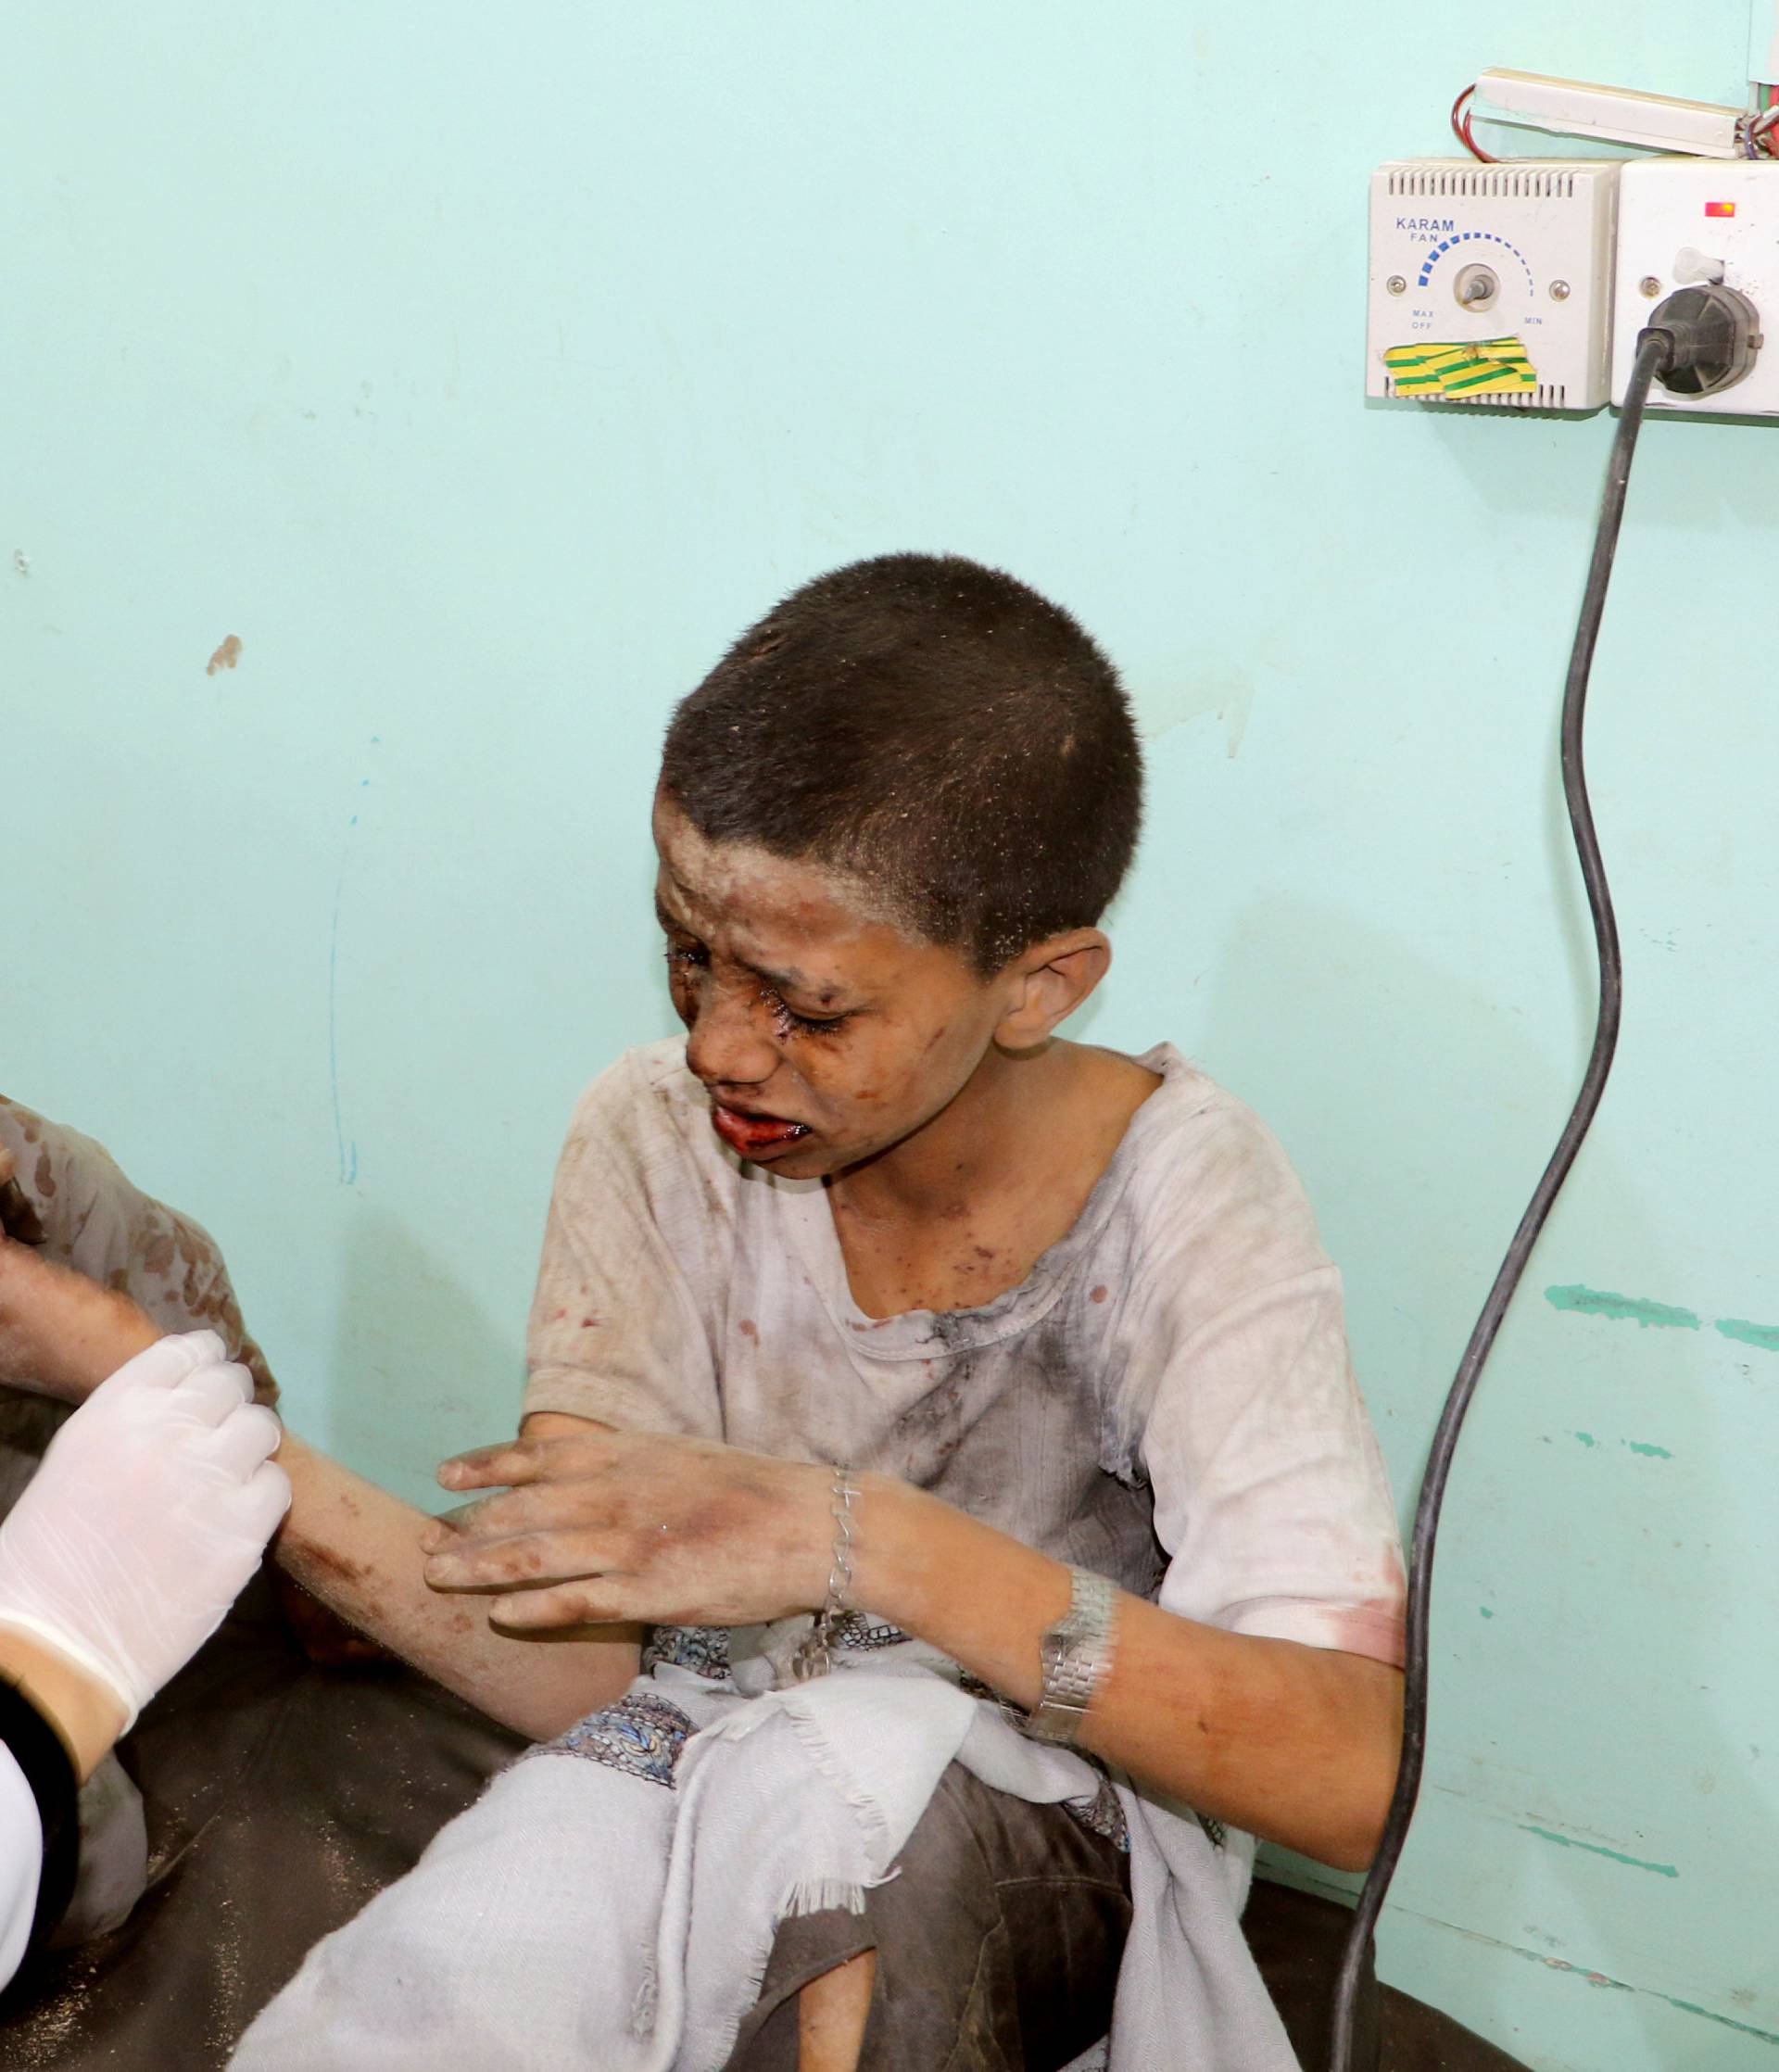 A doctor treats children injured by an airstrike in Saada